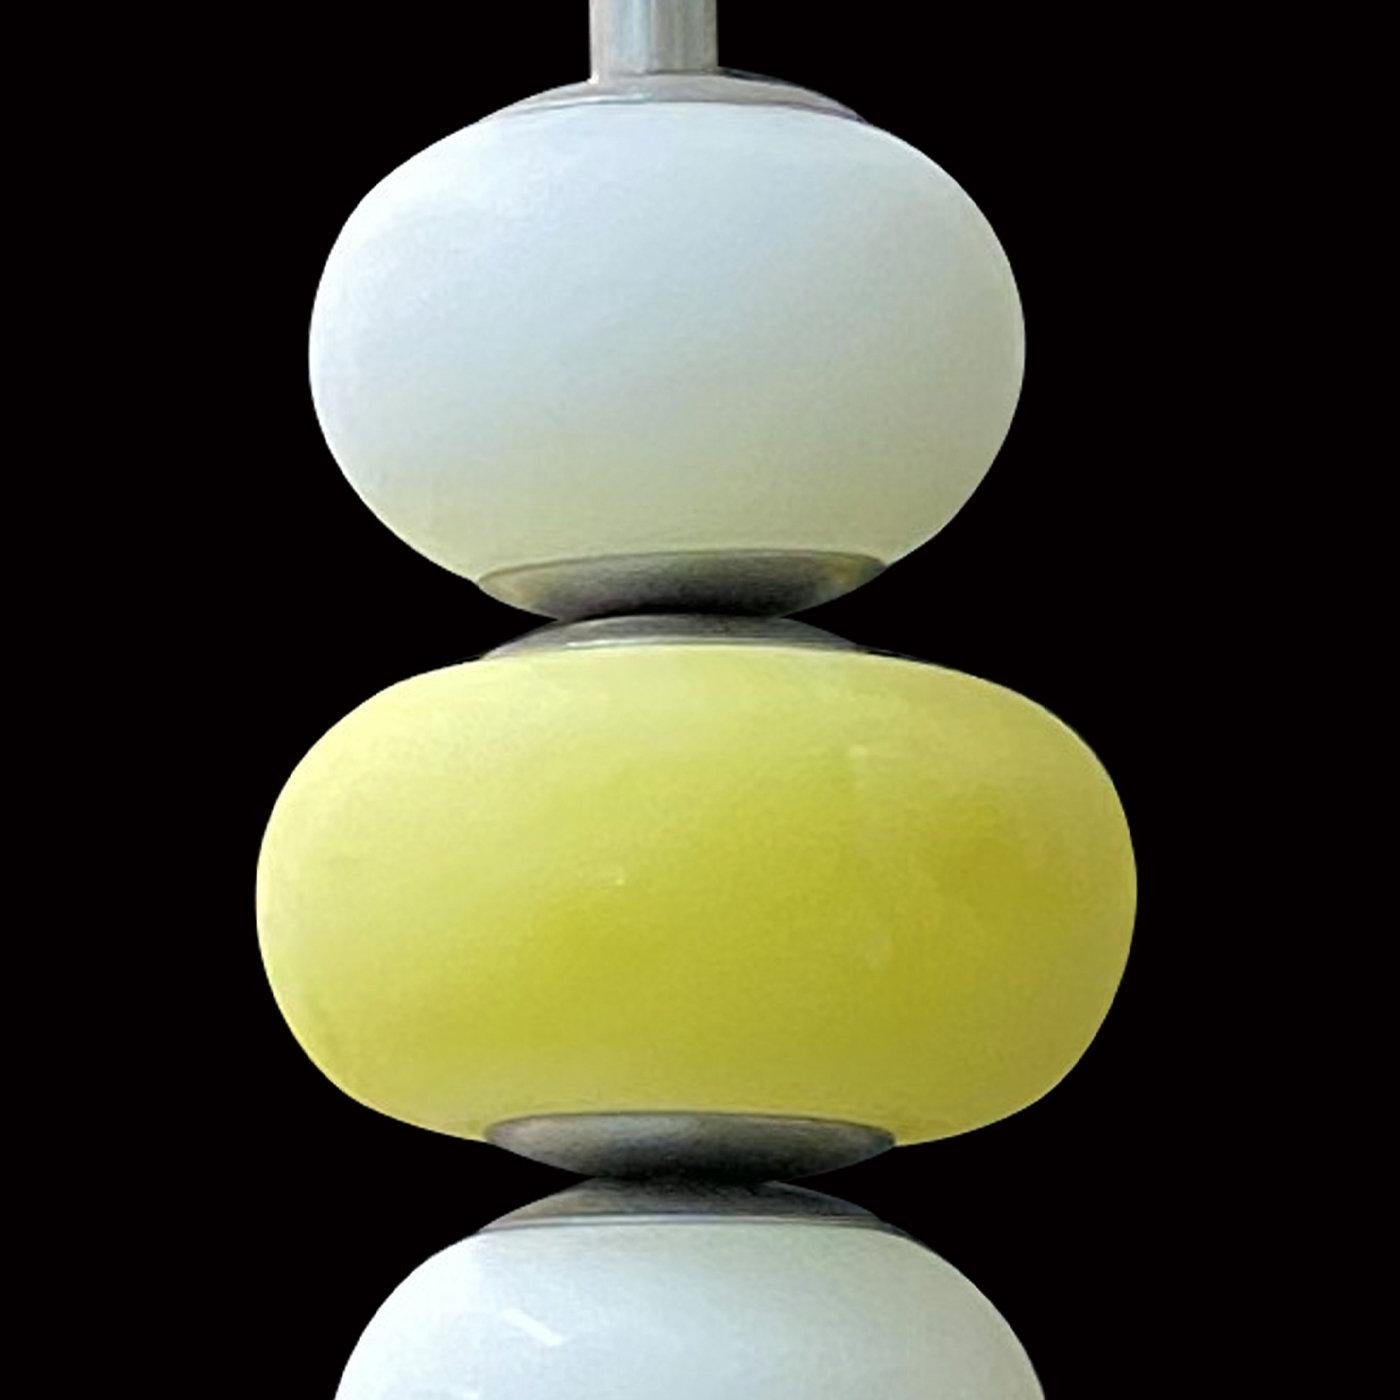 Bulging volumes with flattened poles and fashioned of sandblasted glass define the orderly and fresh look of this pendant lamp, eye-catching addition to any modern decor. Alternating white and bright yellow spheres, the design enhances its